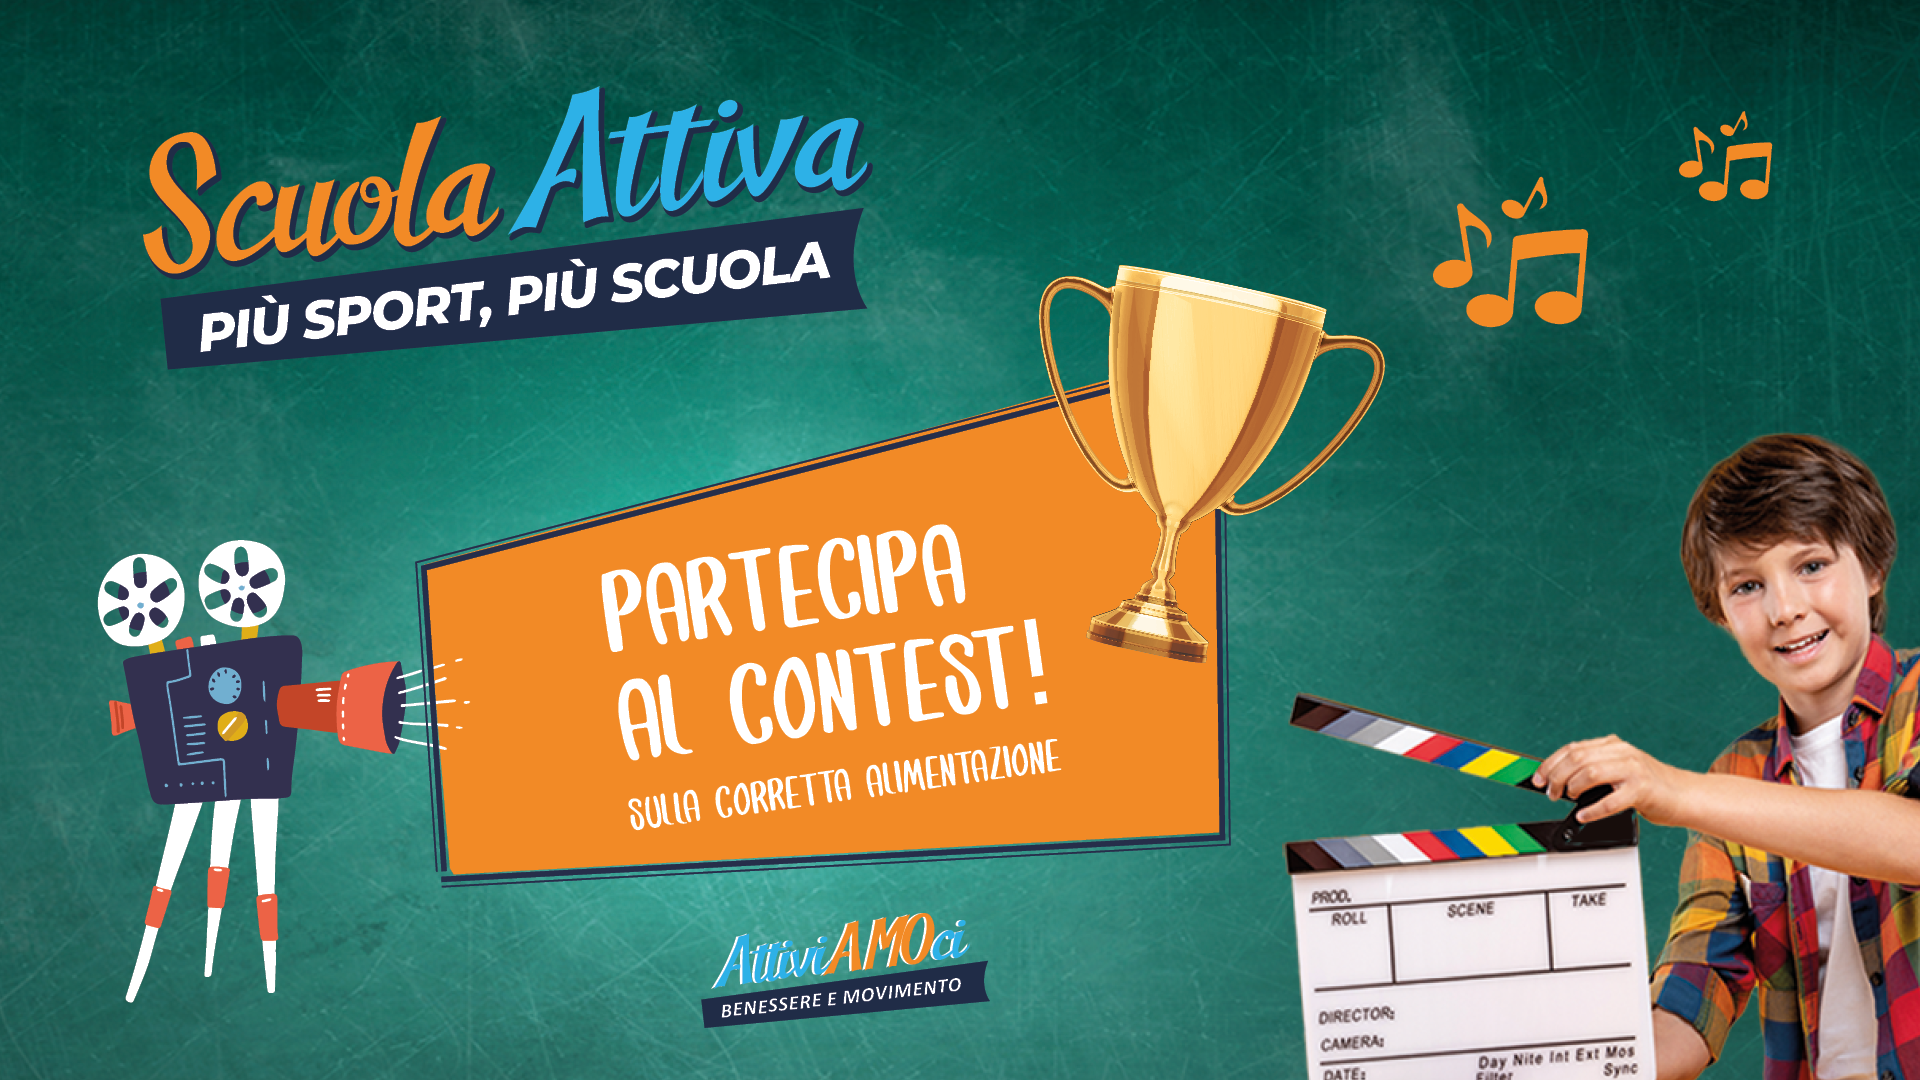 Scuola Attiva S “let S Get Active” Contest Is About To Start Proper Nutrition Has Never Been So